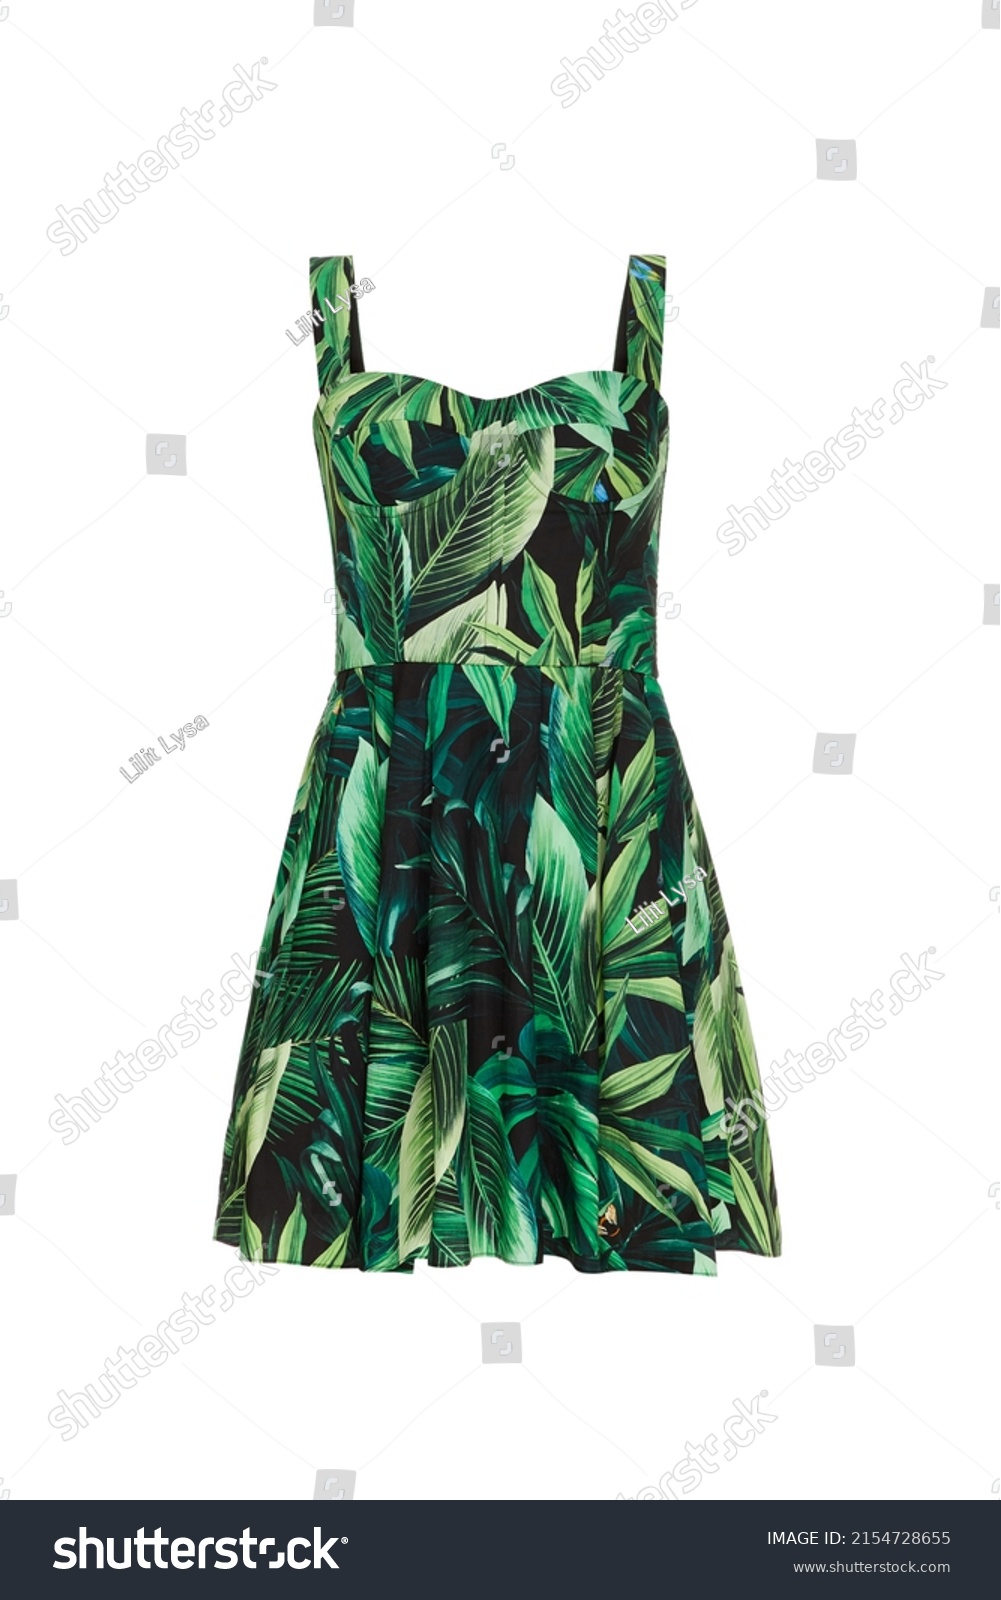 Ghost mannequin, Green women's Designer Sundress Dress Strapless without human model for female ladies in leaf flower palm print pattern isolated on white background, 3d voluminous clothing, mock up #2154728655